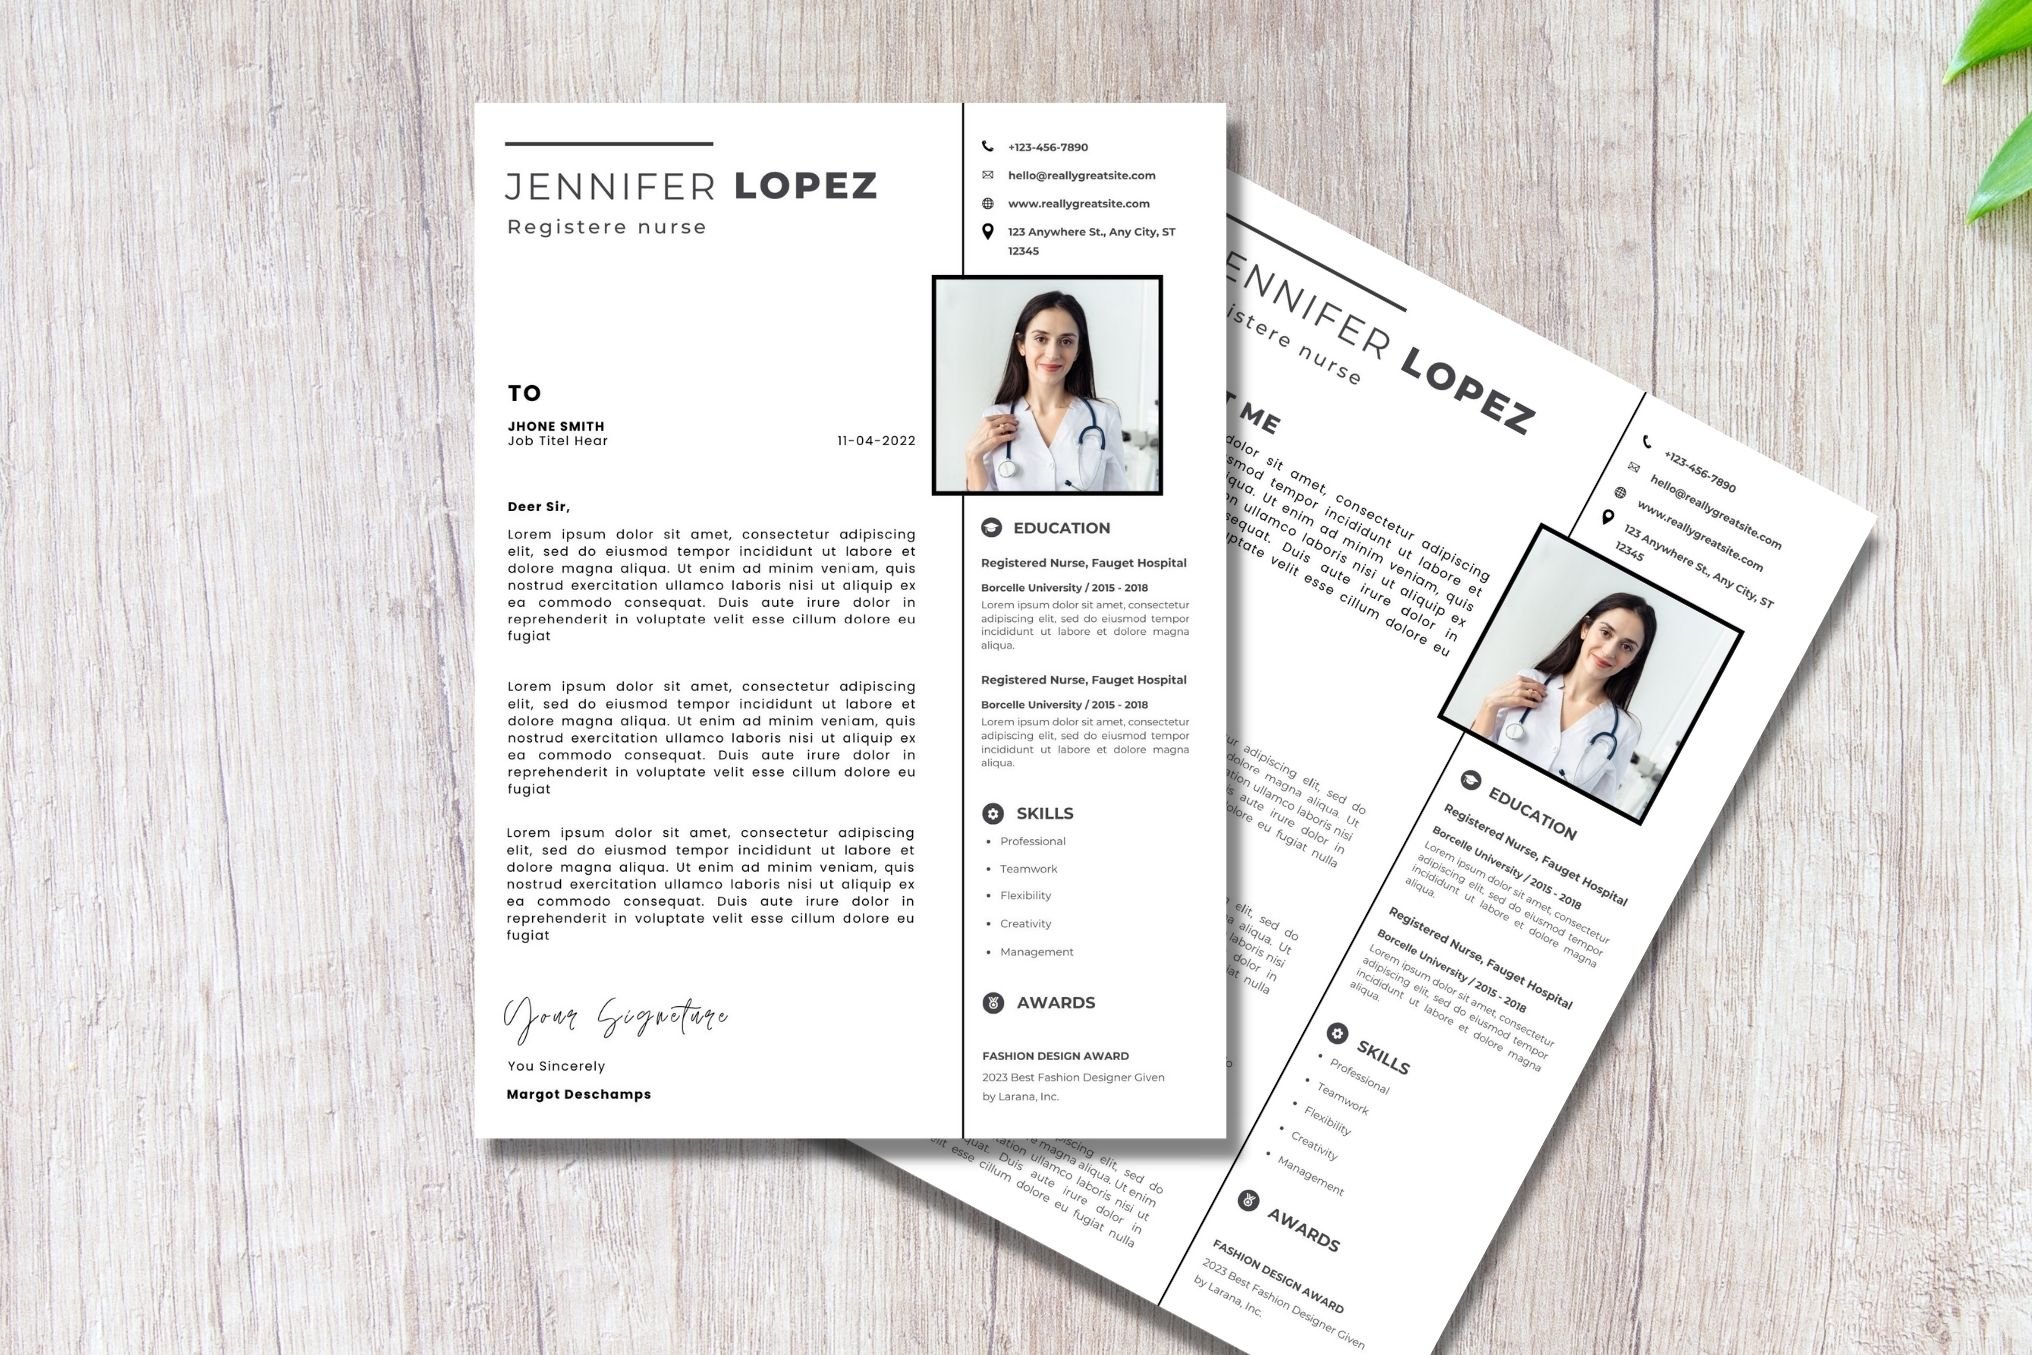 Two resume templates on a wooden table.